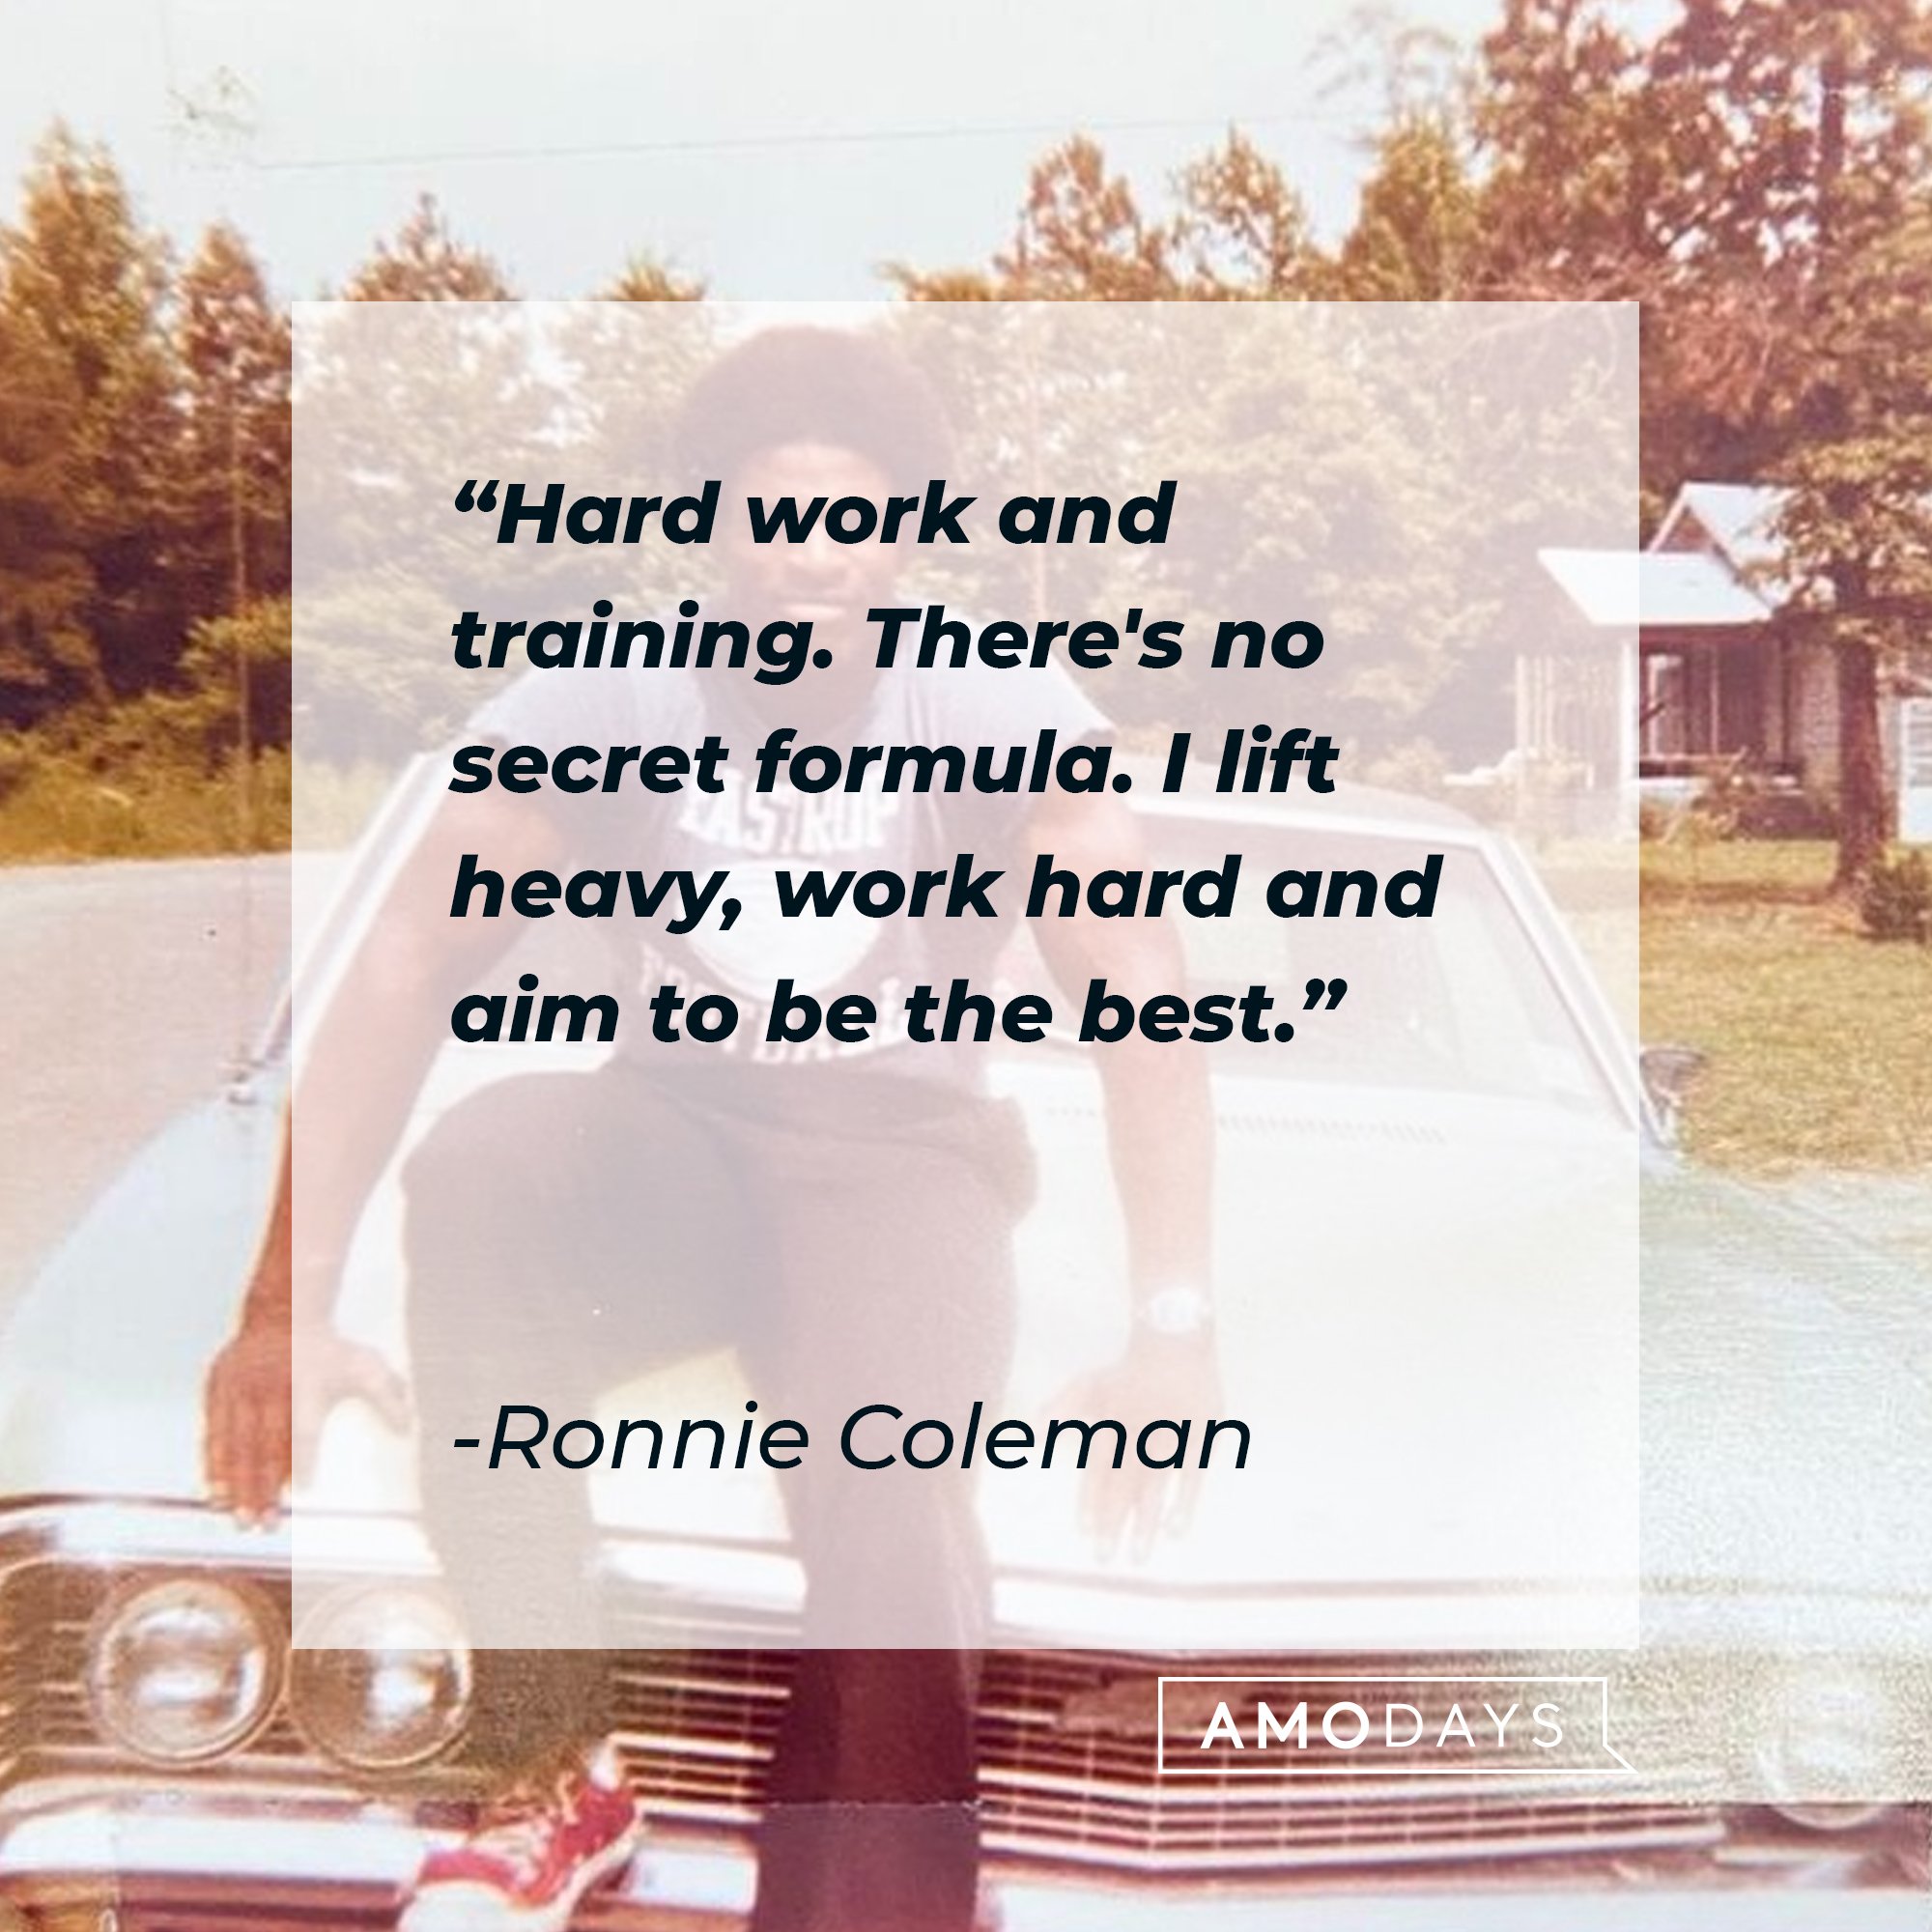   Ronnie Coleman’s quote: “Hard work and training. There's no secret formula. I lift heavy, work hard and aim to be the best.” | Image: AmoDays